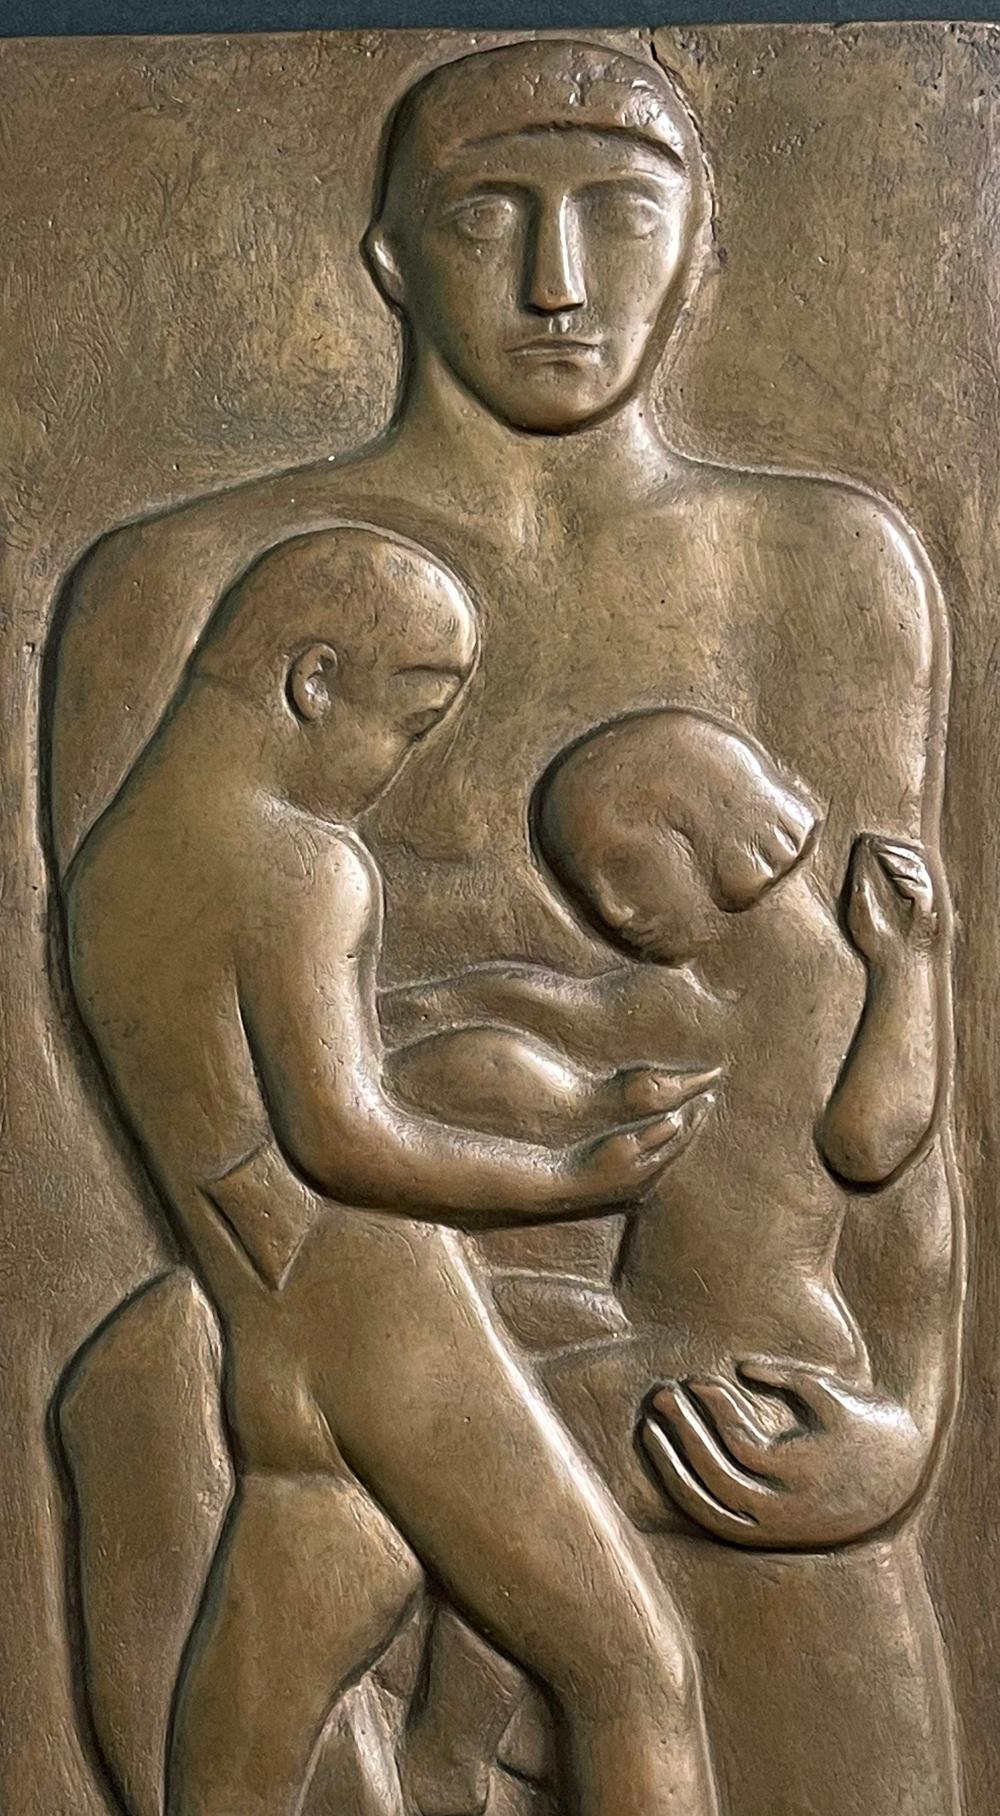 Beautifully sculpted and realized in bronze with a warm, deep brown patina, this relief panel by William Zorach depicts a father directly facing the viewer, embracing his son and daughter who are both engrossed in the care of a long-tailed bird.